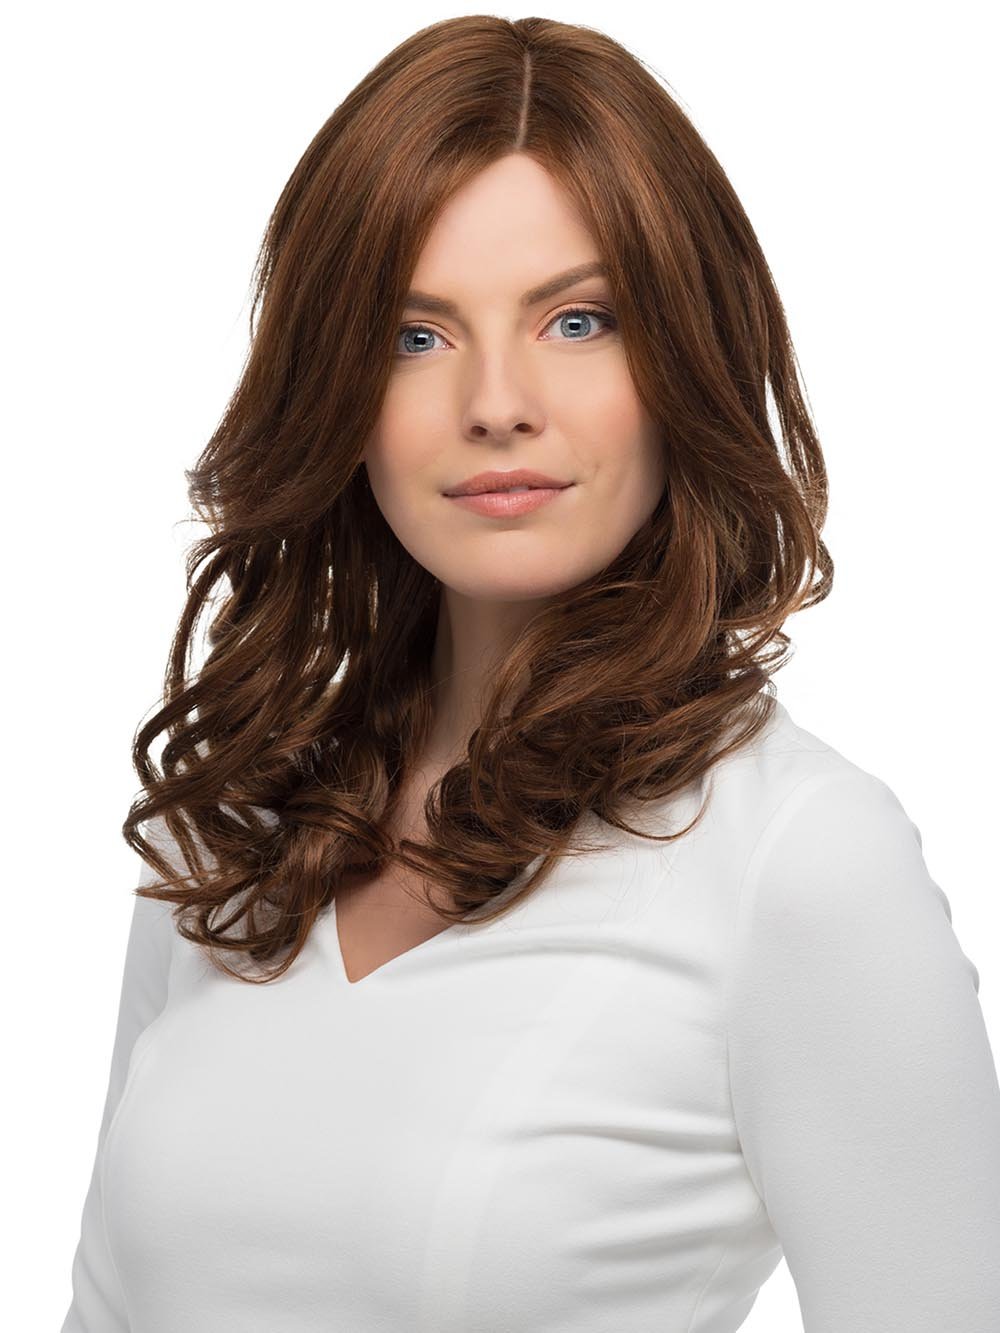 LILIANA by ESTETICA in R6/30H | CHESTNUT BROWN with Medium Auburn Highlights PPC MAIN IMAGE